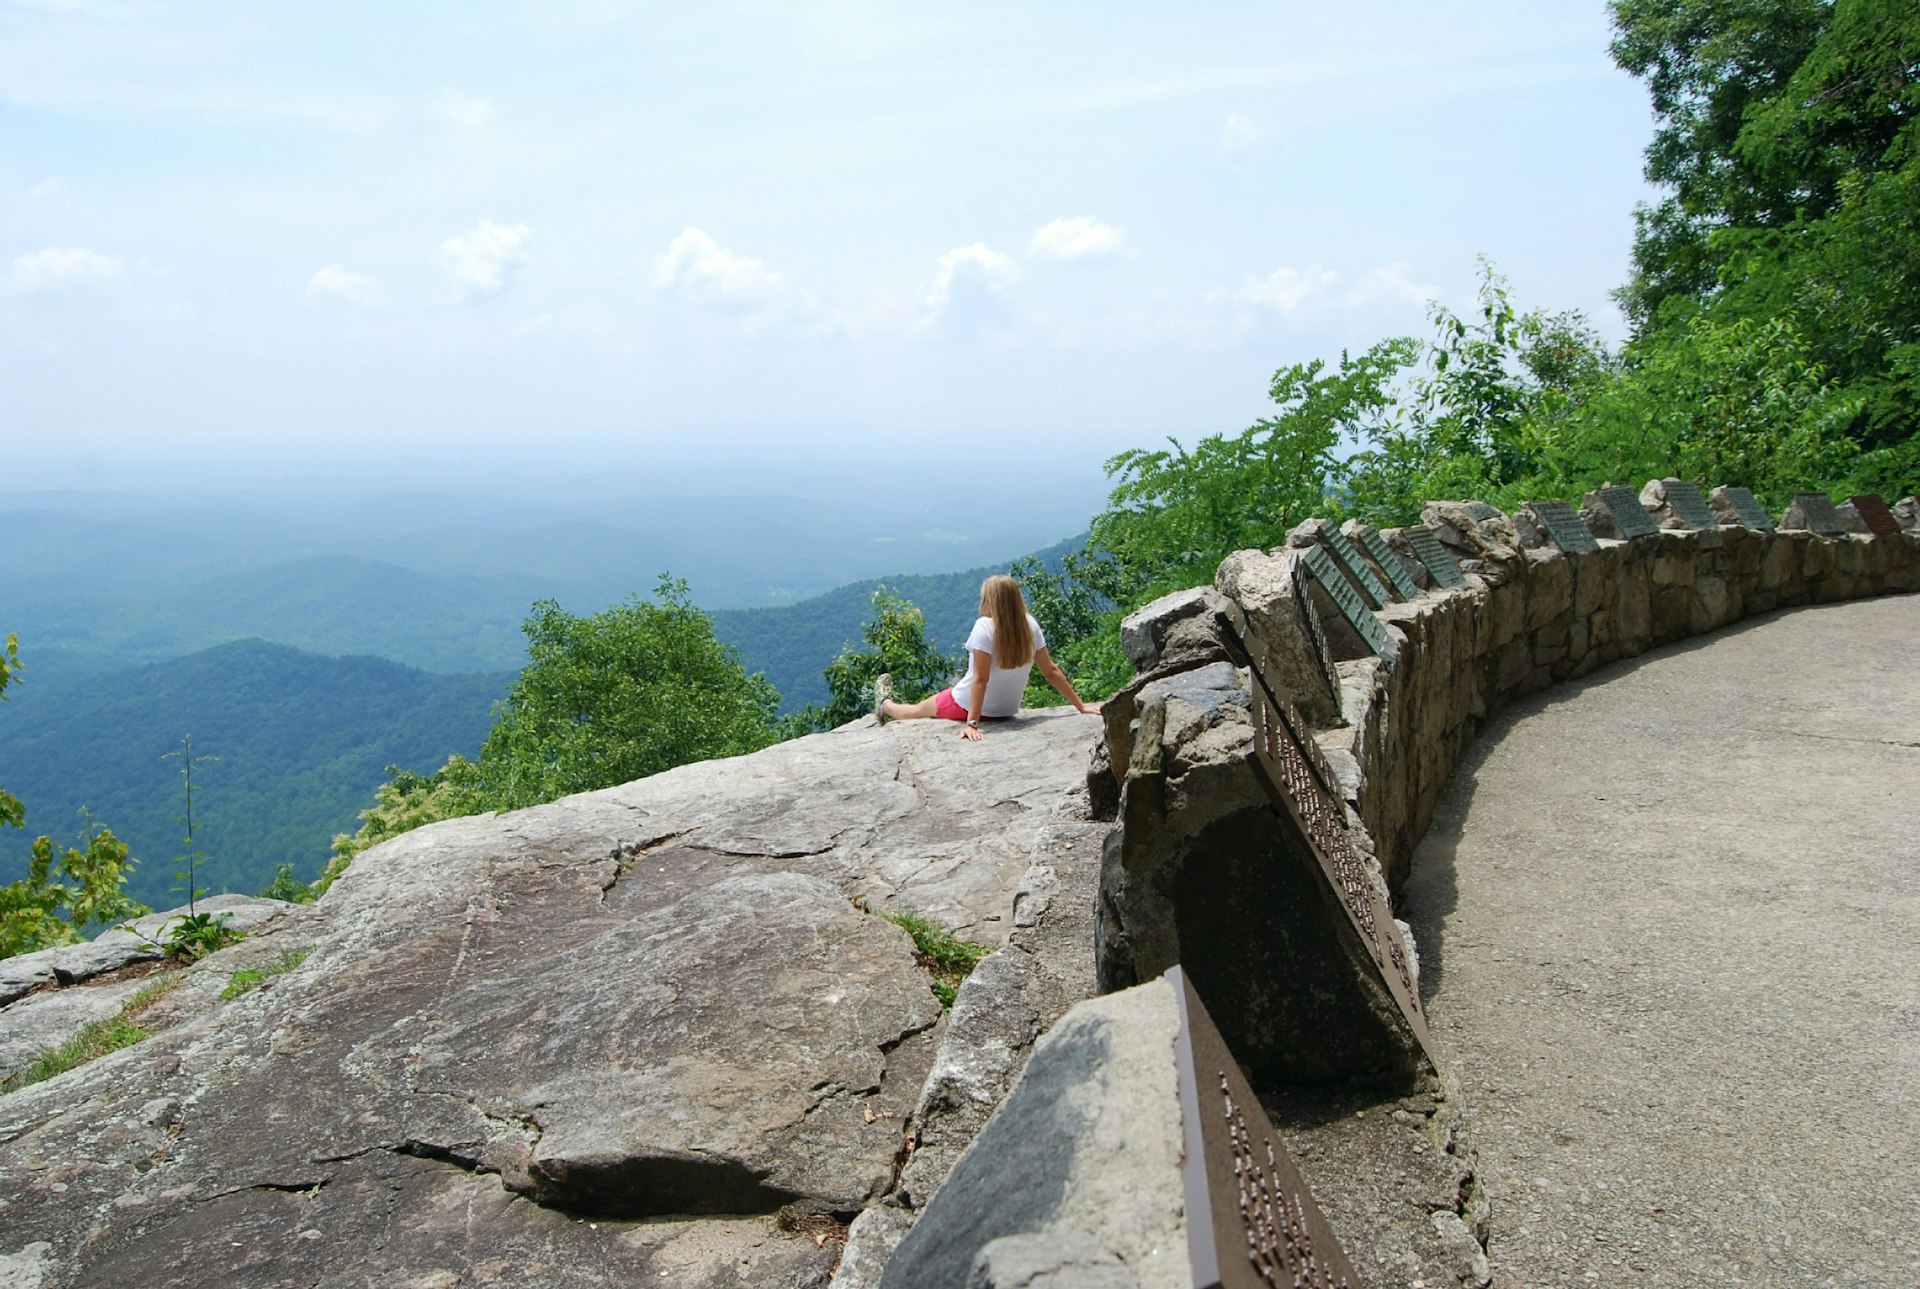 A woman sitting on a rocky outcrop with an expansive view of the Blue Ridge Mountains